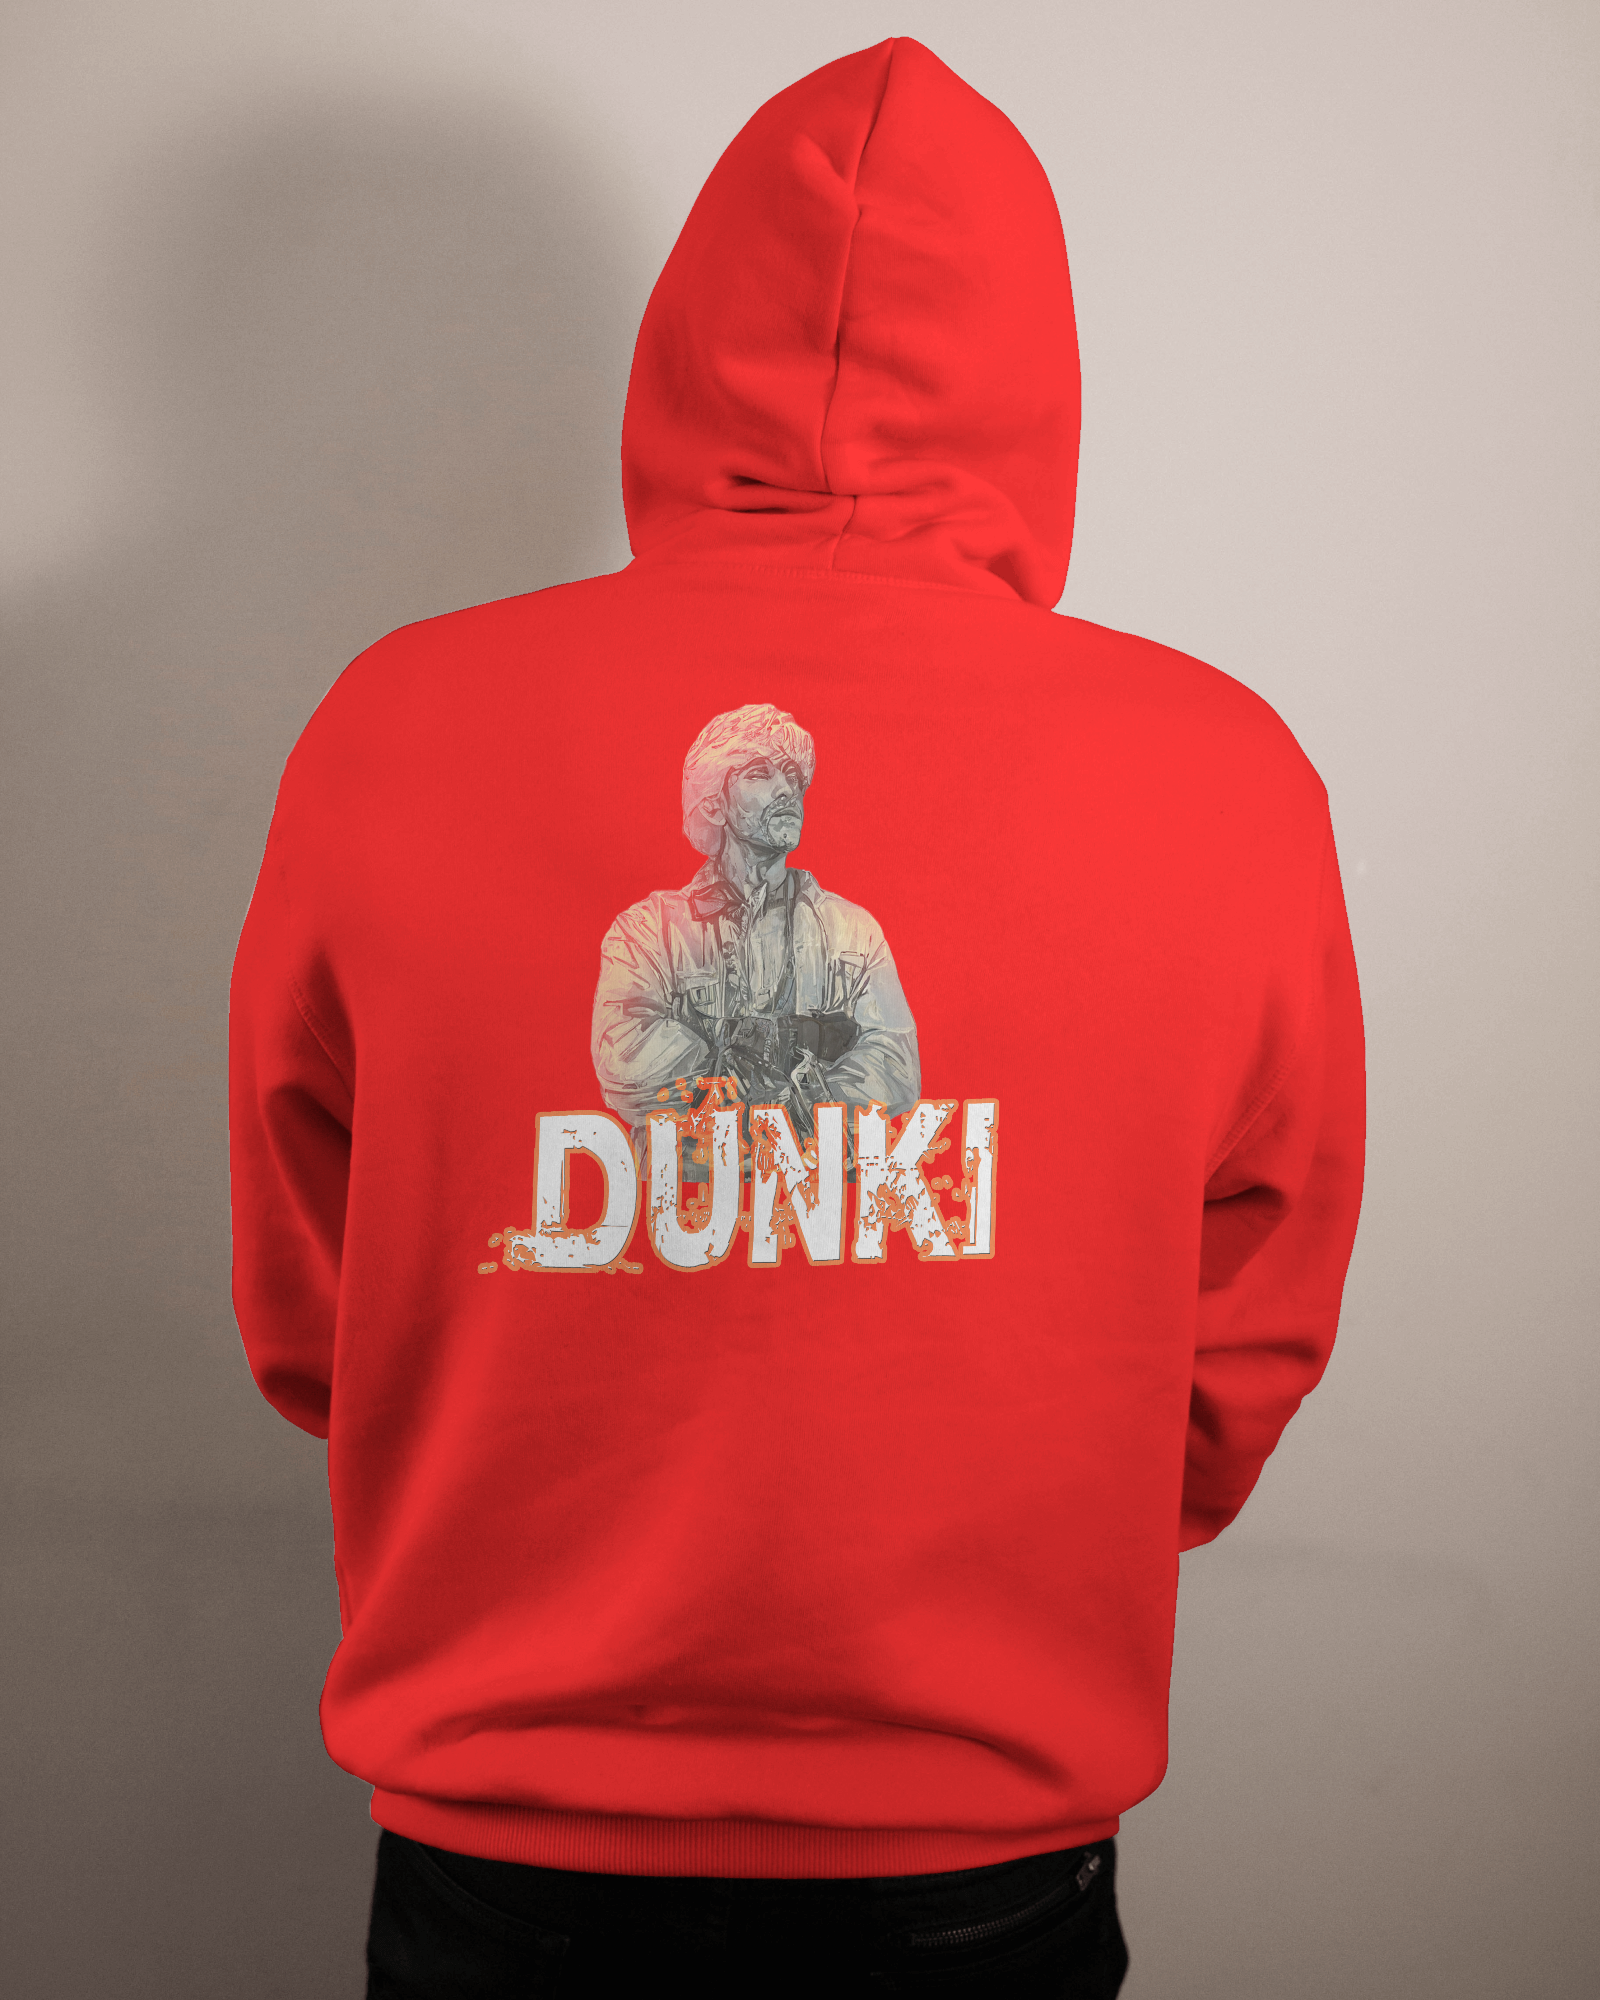 DUNKI DESIGN BACK PRINTED HOODIES FOR WINTER RED COLOUR